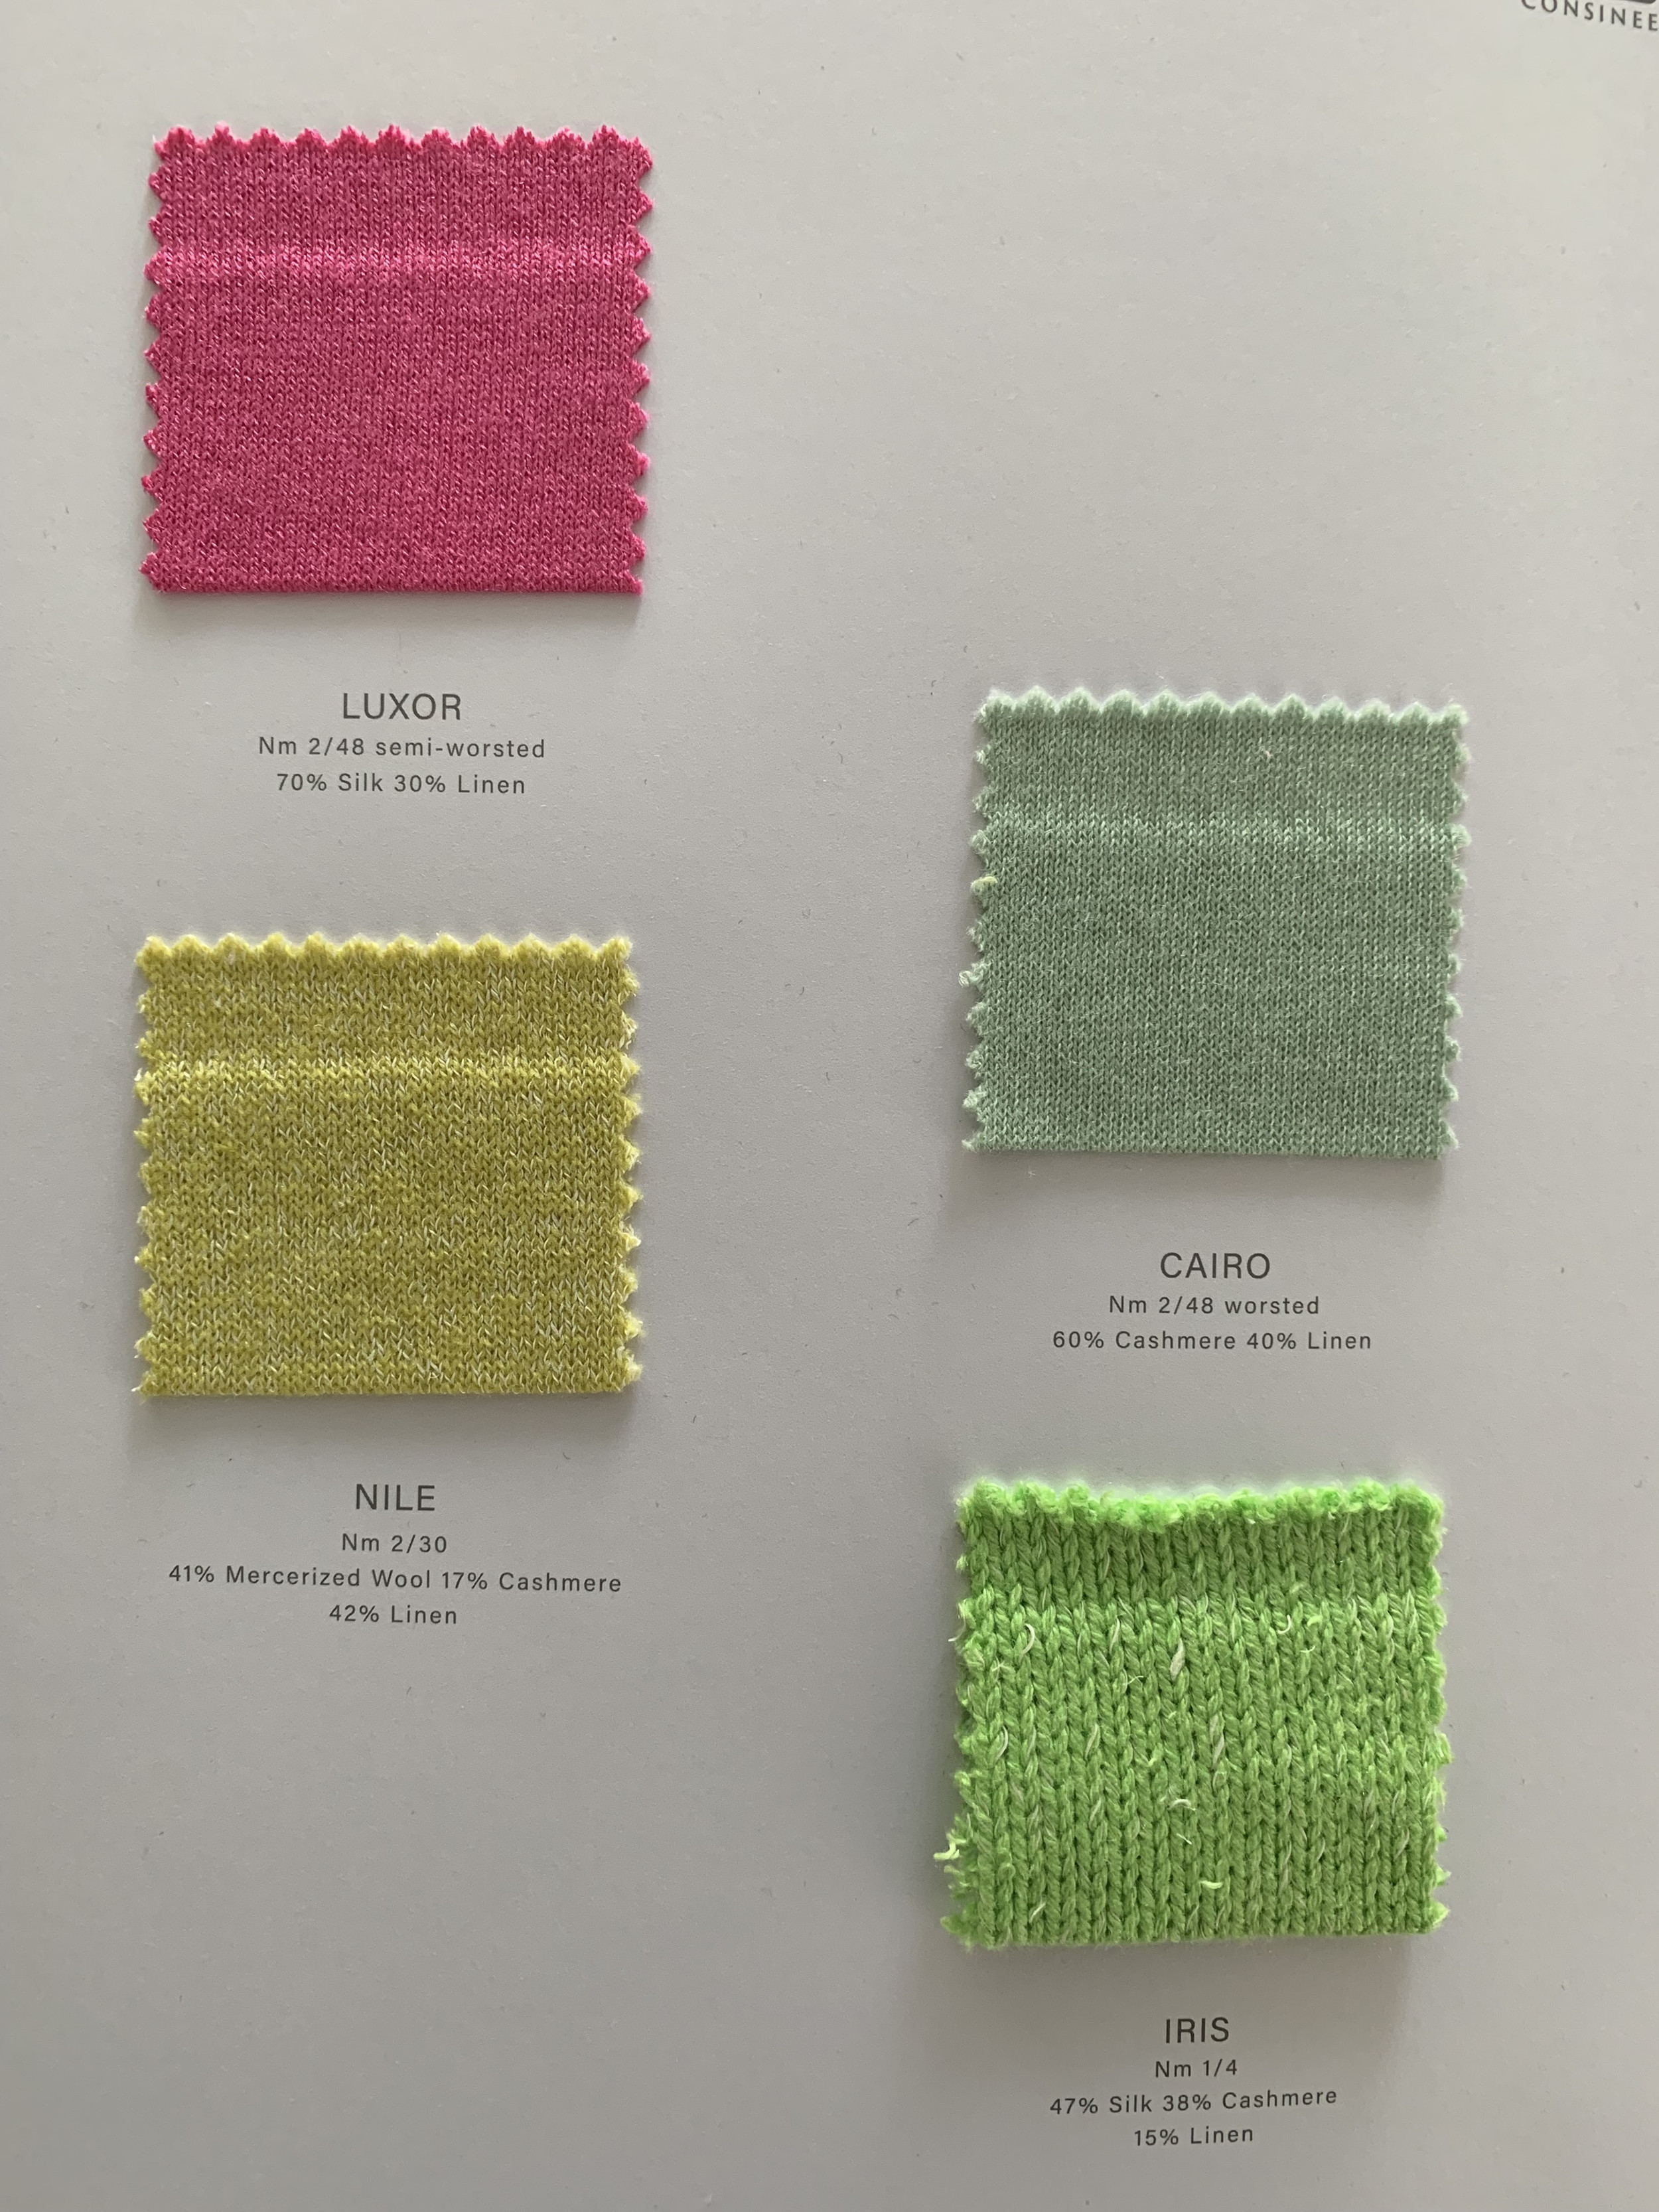 Ewsca spring cashmere blend colors cards with all materials